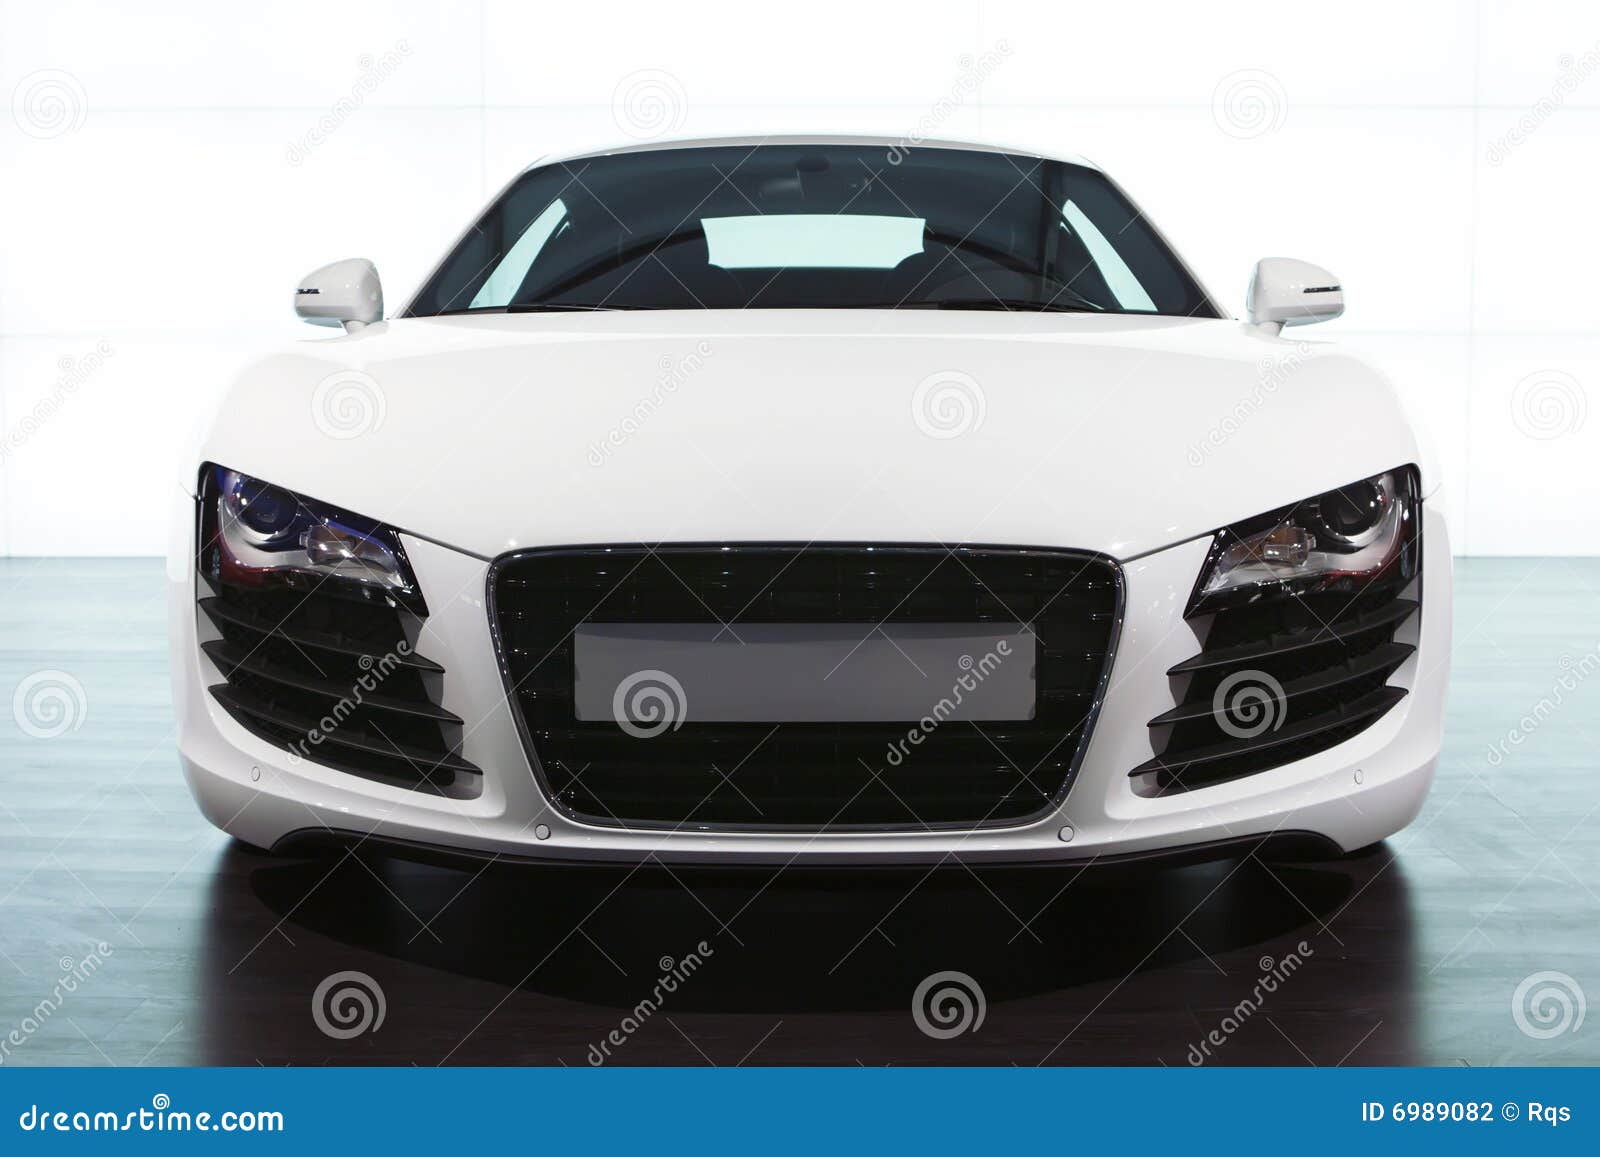 foreground of white sportcar audi